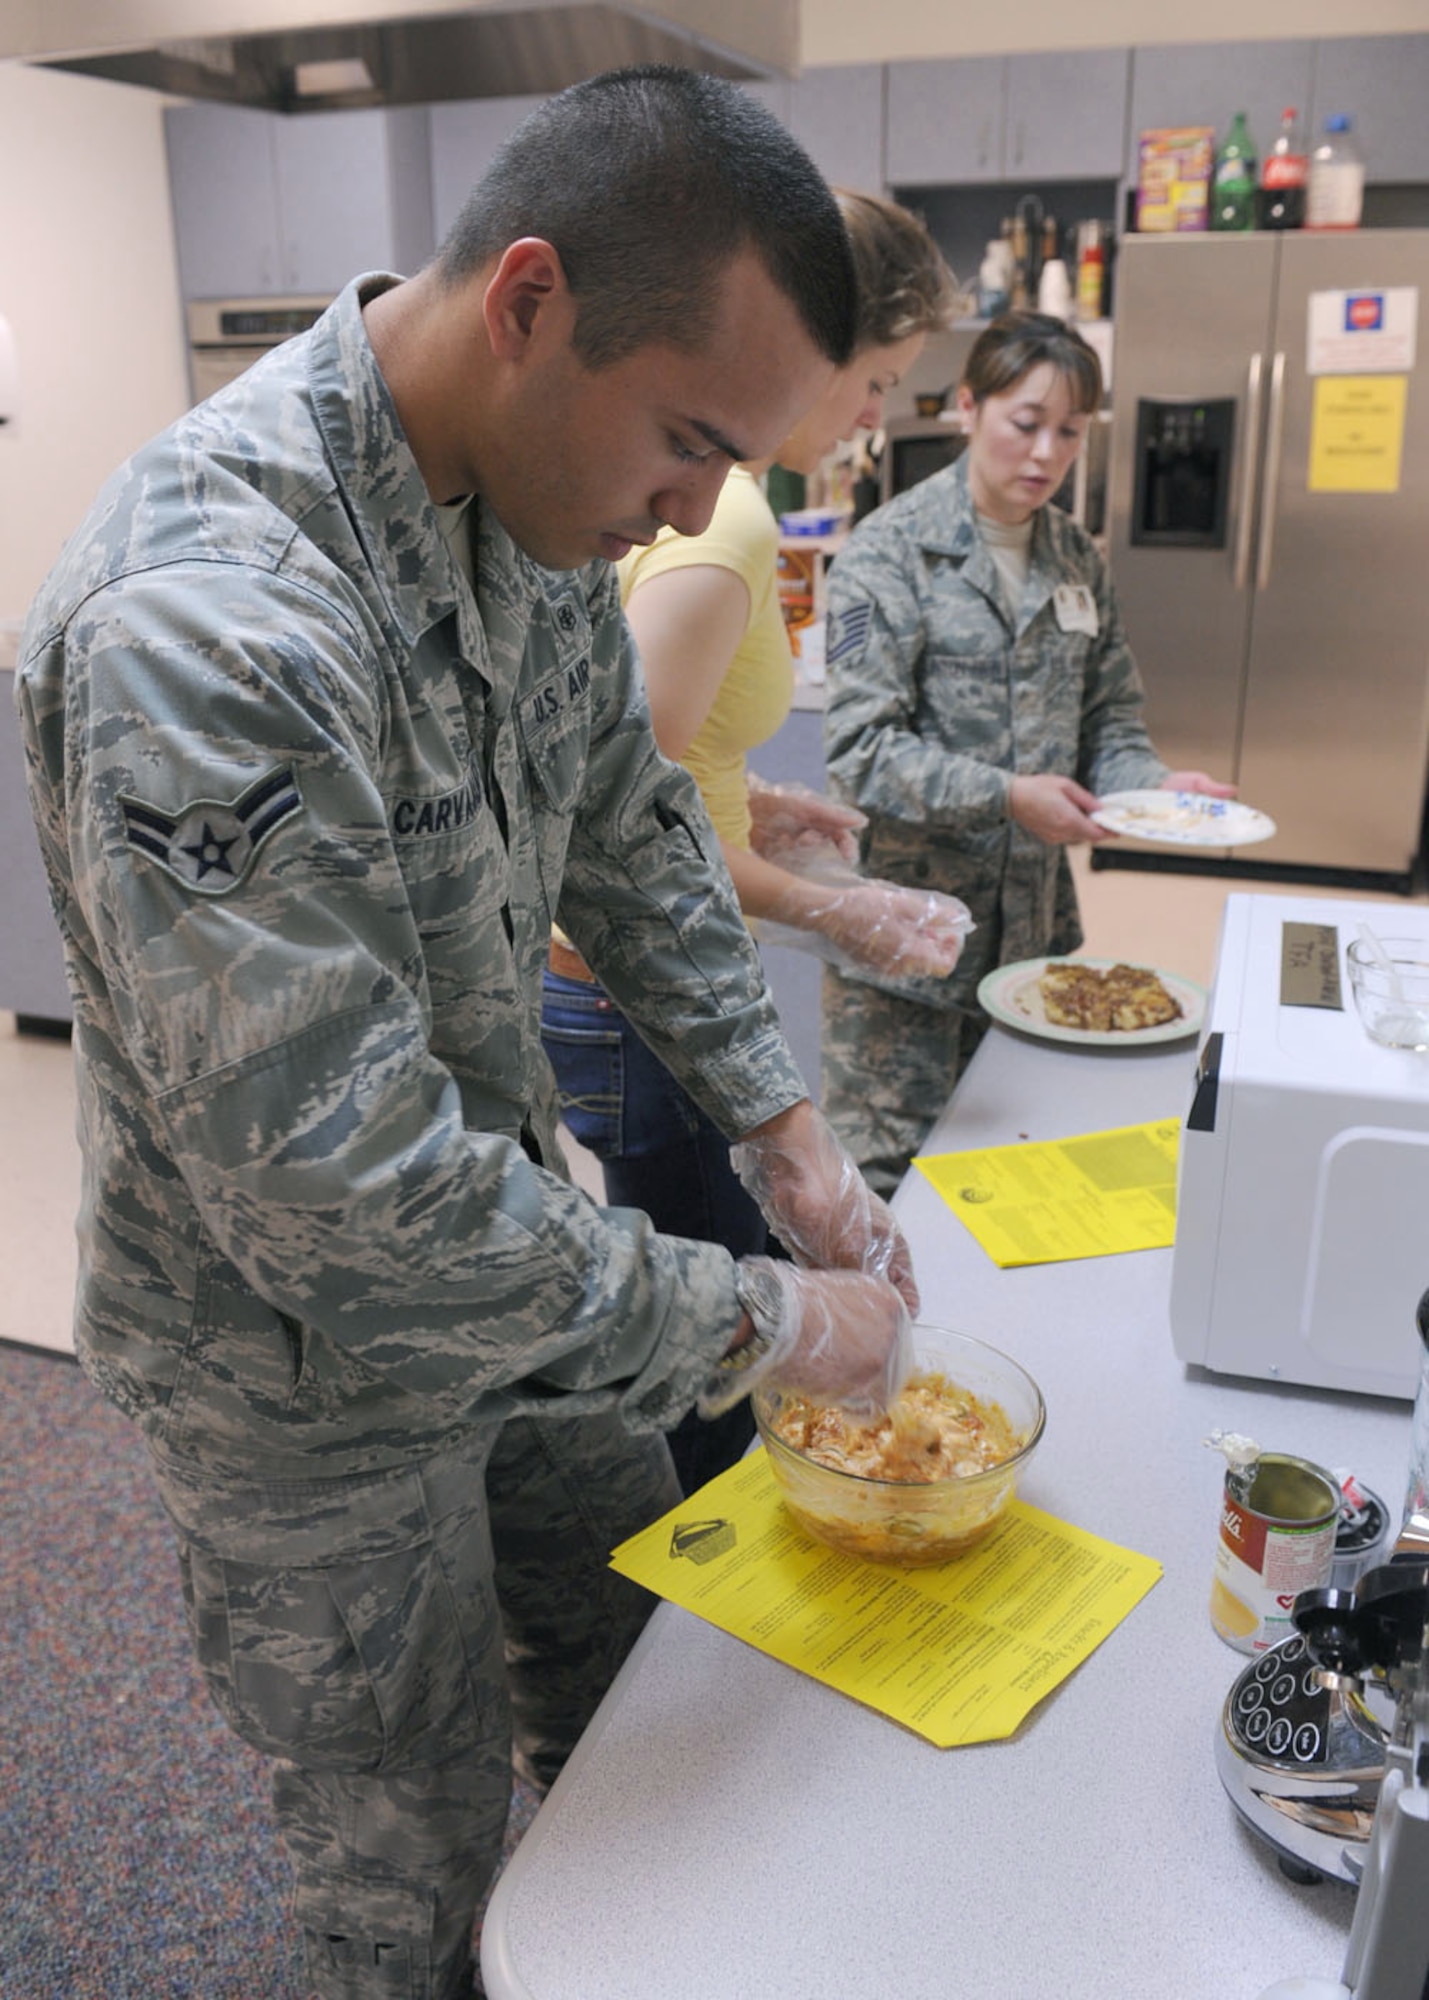 DYESS AIR FORCE BASE, Texas – Airman 1st Class Hossmann Carvajalino, 7th Medical Group, prepares food to be cooked March 18 during a microwave cooking class at the Health and Wellness Center here. The class is designed to teach dorm residents the flexibility of microwave cooking so they're not bound to the dining facility. Airmen learned to cook cinnamon rolls, chicken dip and sweet and sour chicken. March is National Nutrition Month and Dyess Health and Wellness Center is offering nutrition bingo March 24 from 5-6 p.m., kids healthy snack class March 25 from 10-11 a.m. and a snack bar challenge that ends March 25. For more information, visit the HAWC at the fitness center or call (325) 696-4140. (U.S Air Force Photo/ Senior Airman Chelsea Cummings)